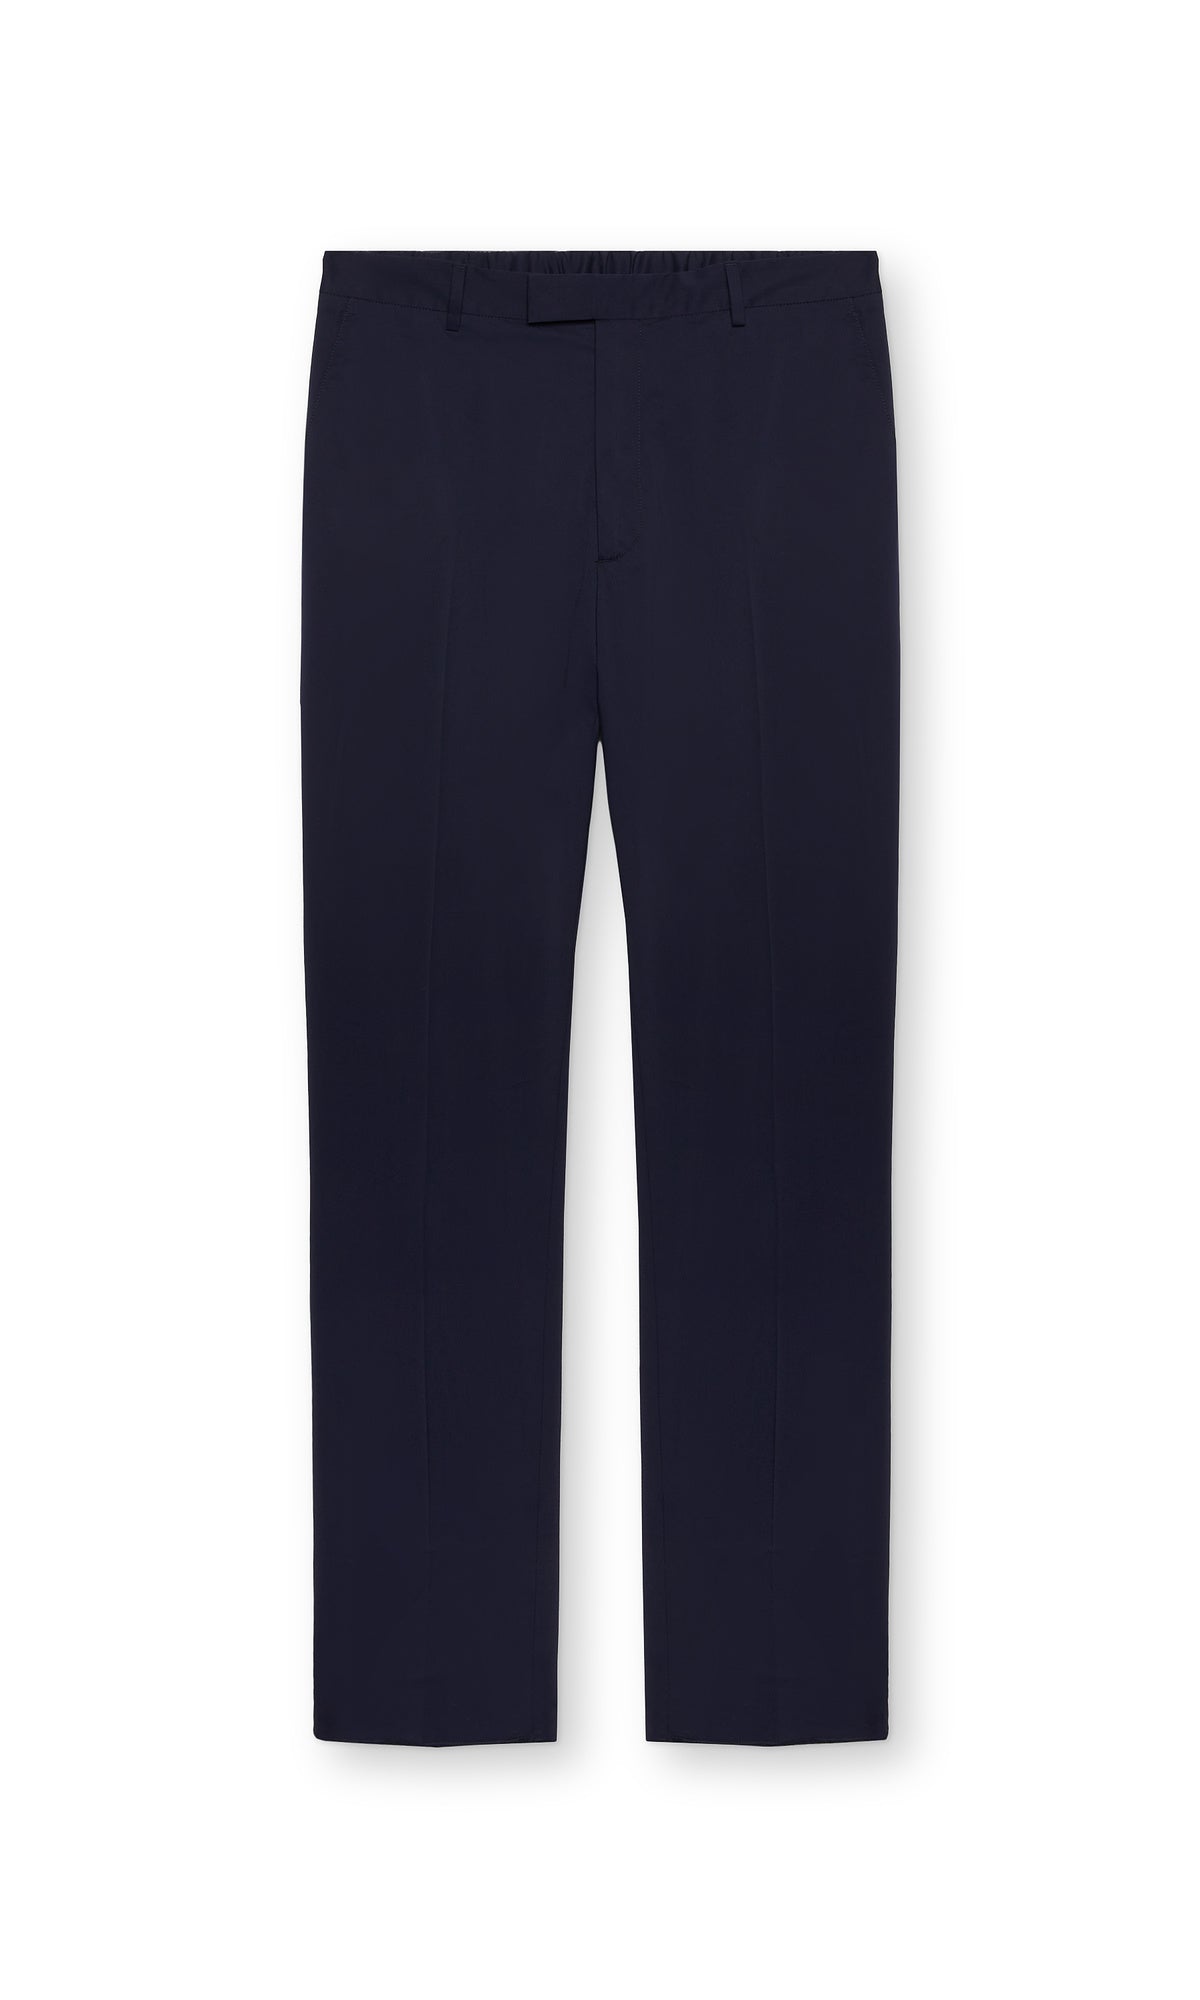 Cotton Jersey Jogging Trousers